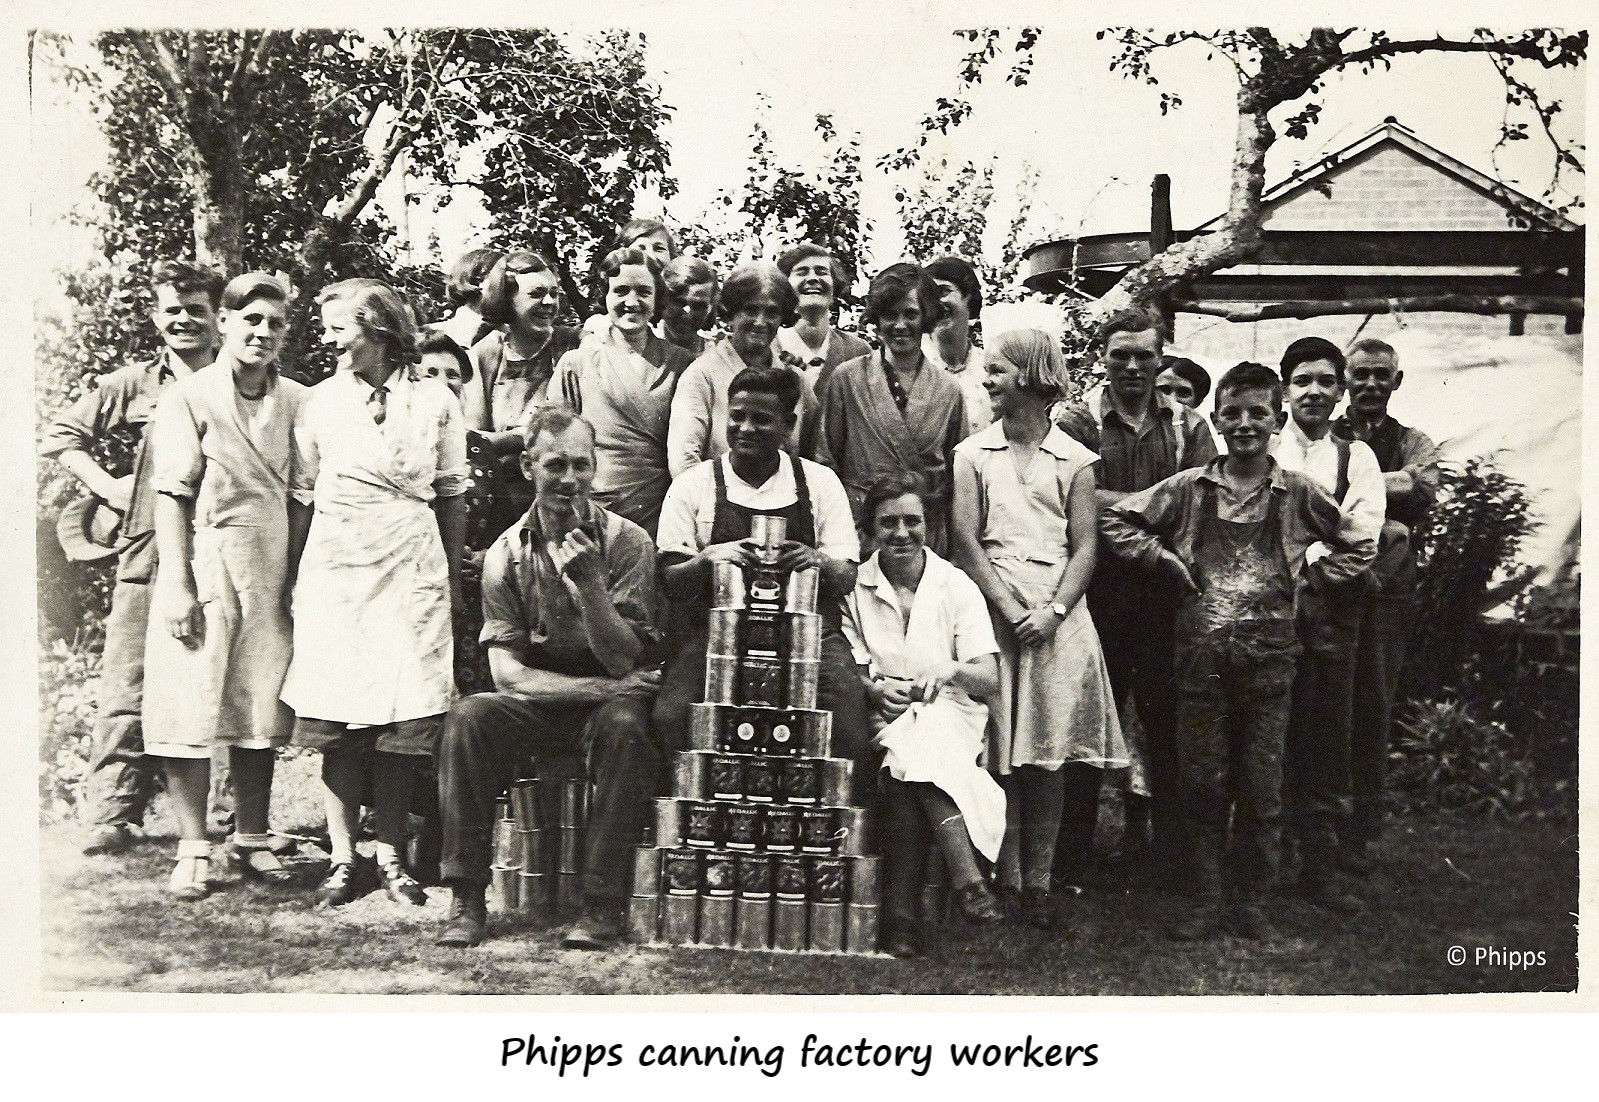 Phipps Canning Factory workers